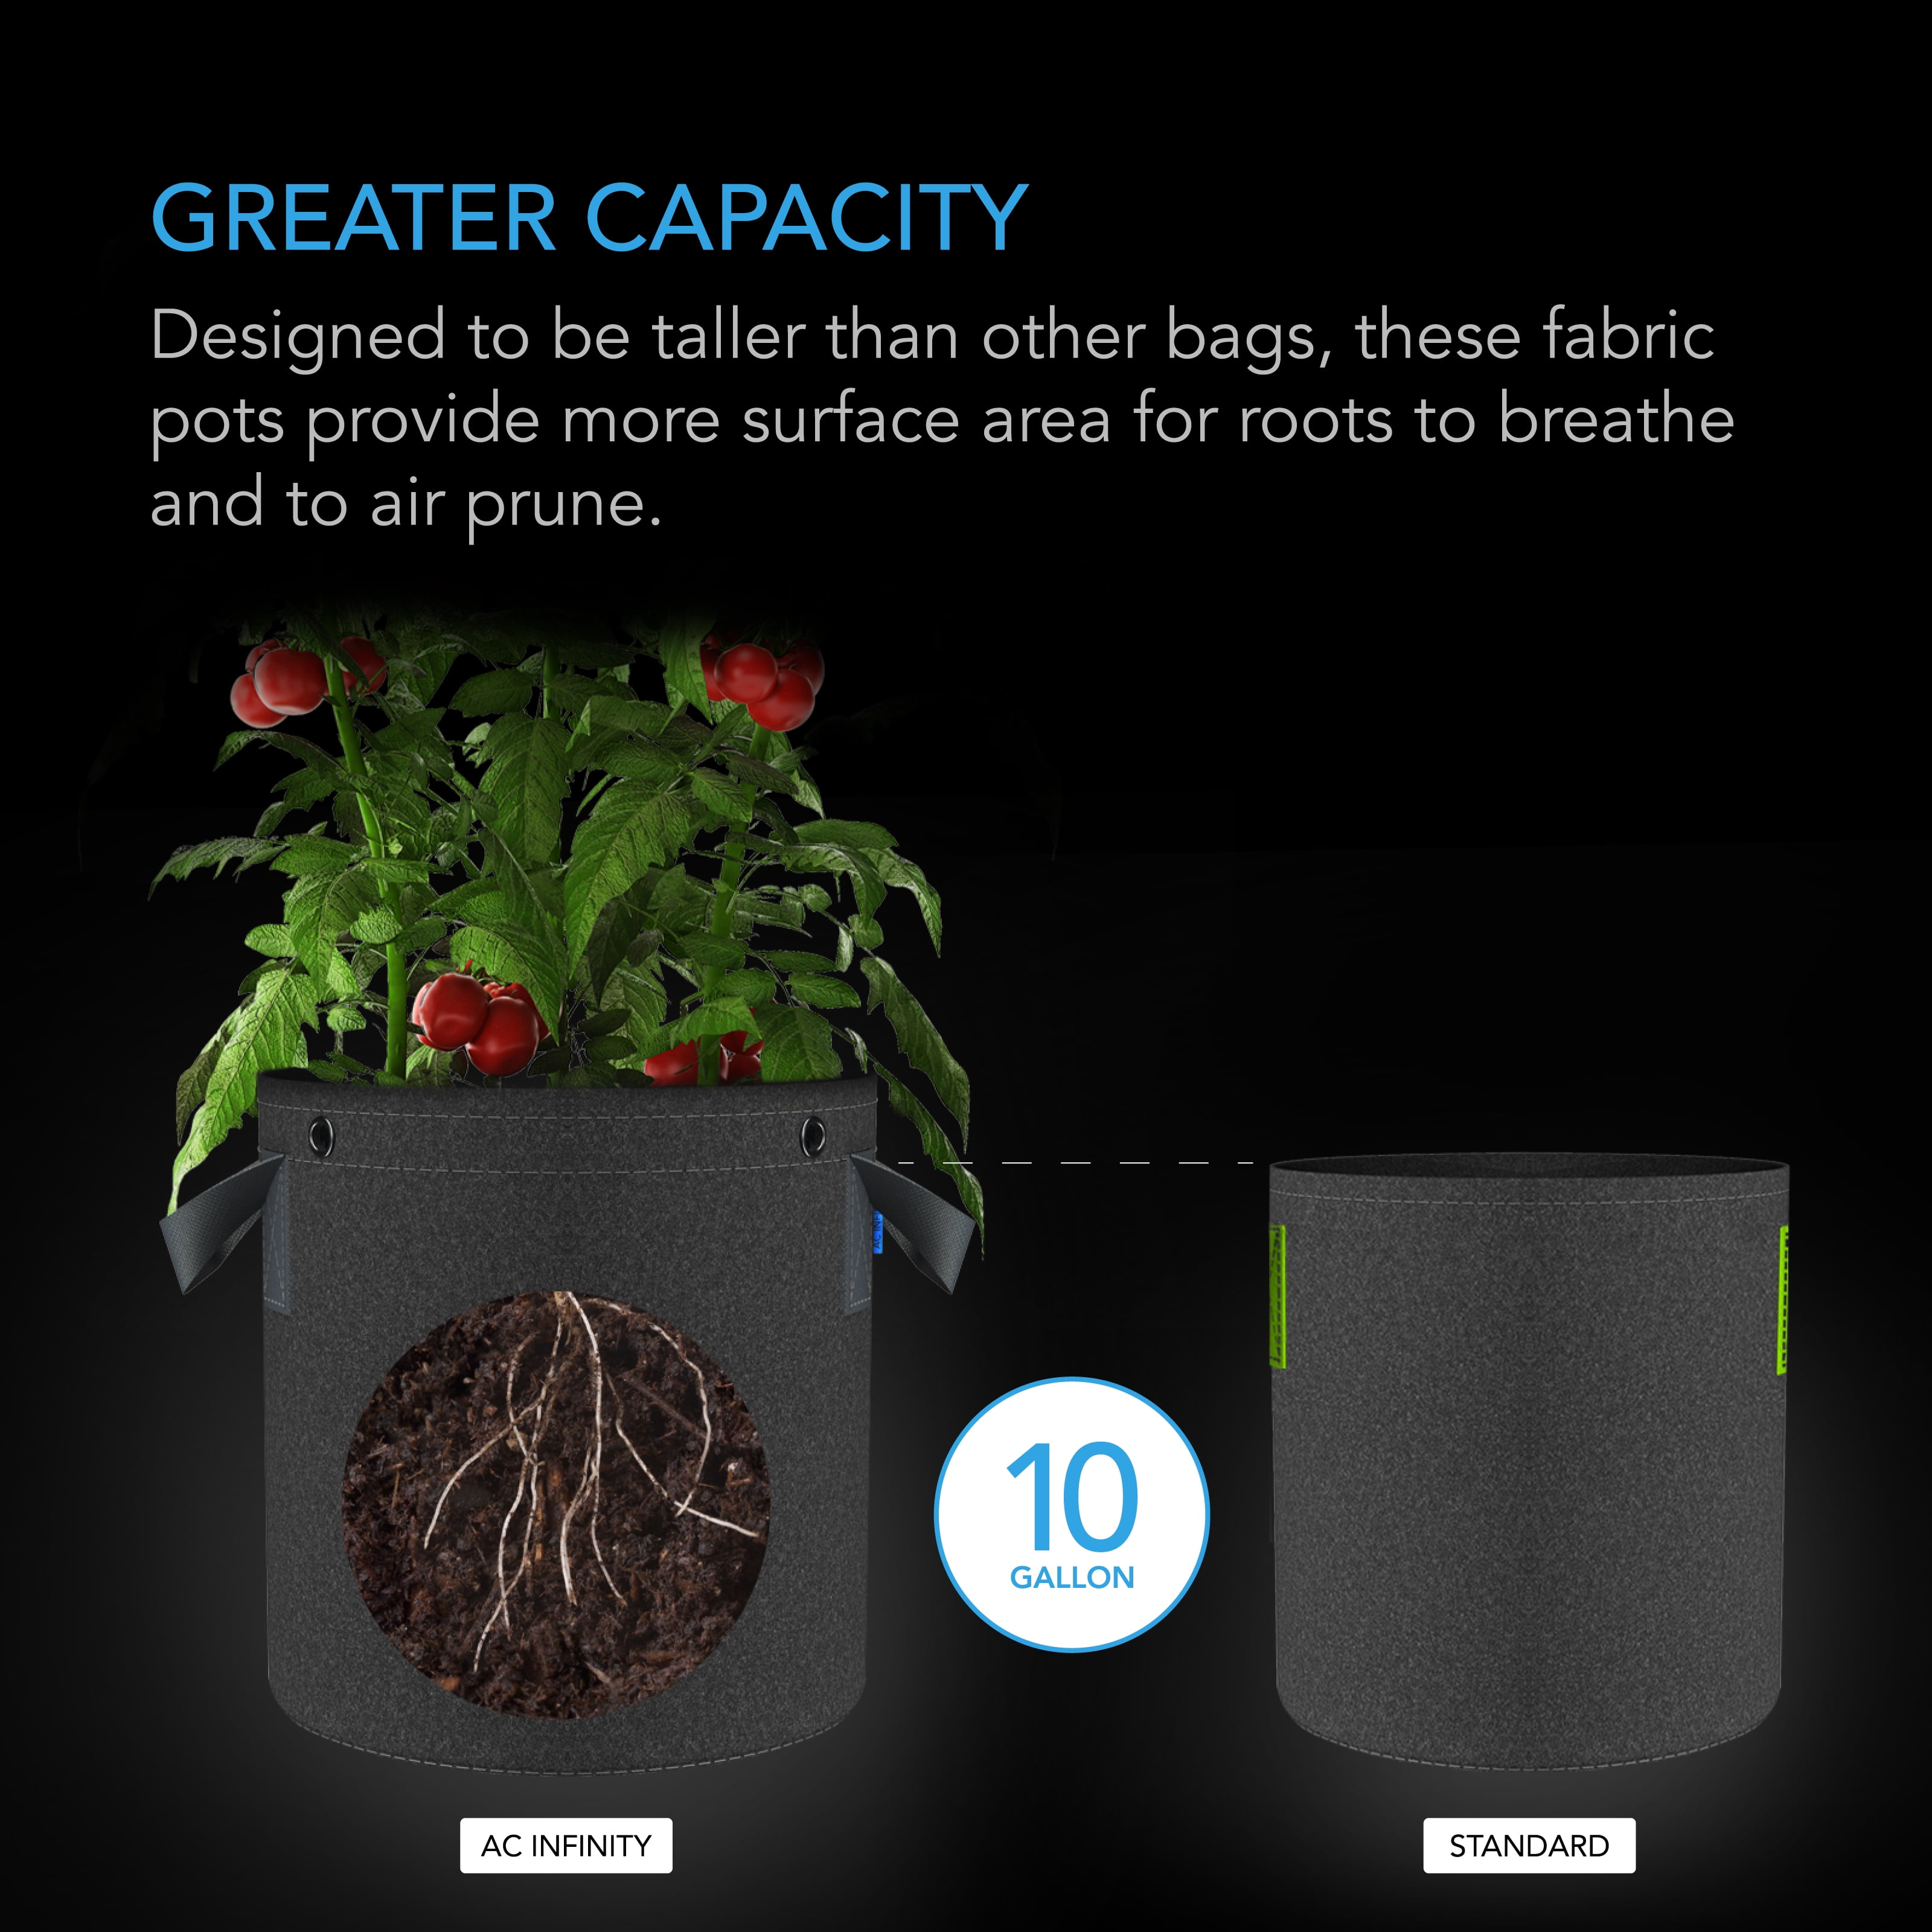 3 Gallon Grow Bags 5-Pack Black Thickened Nonwoven Fabric Pots with Handles, Multi-Purpose Rings